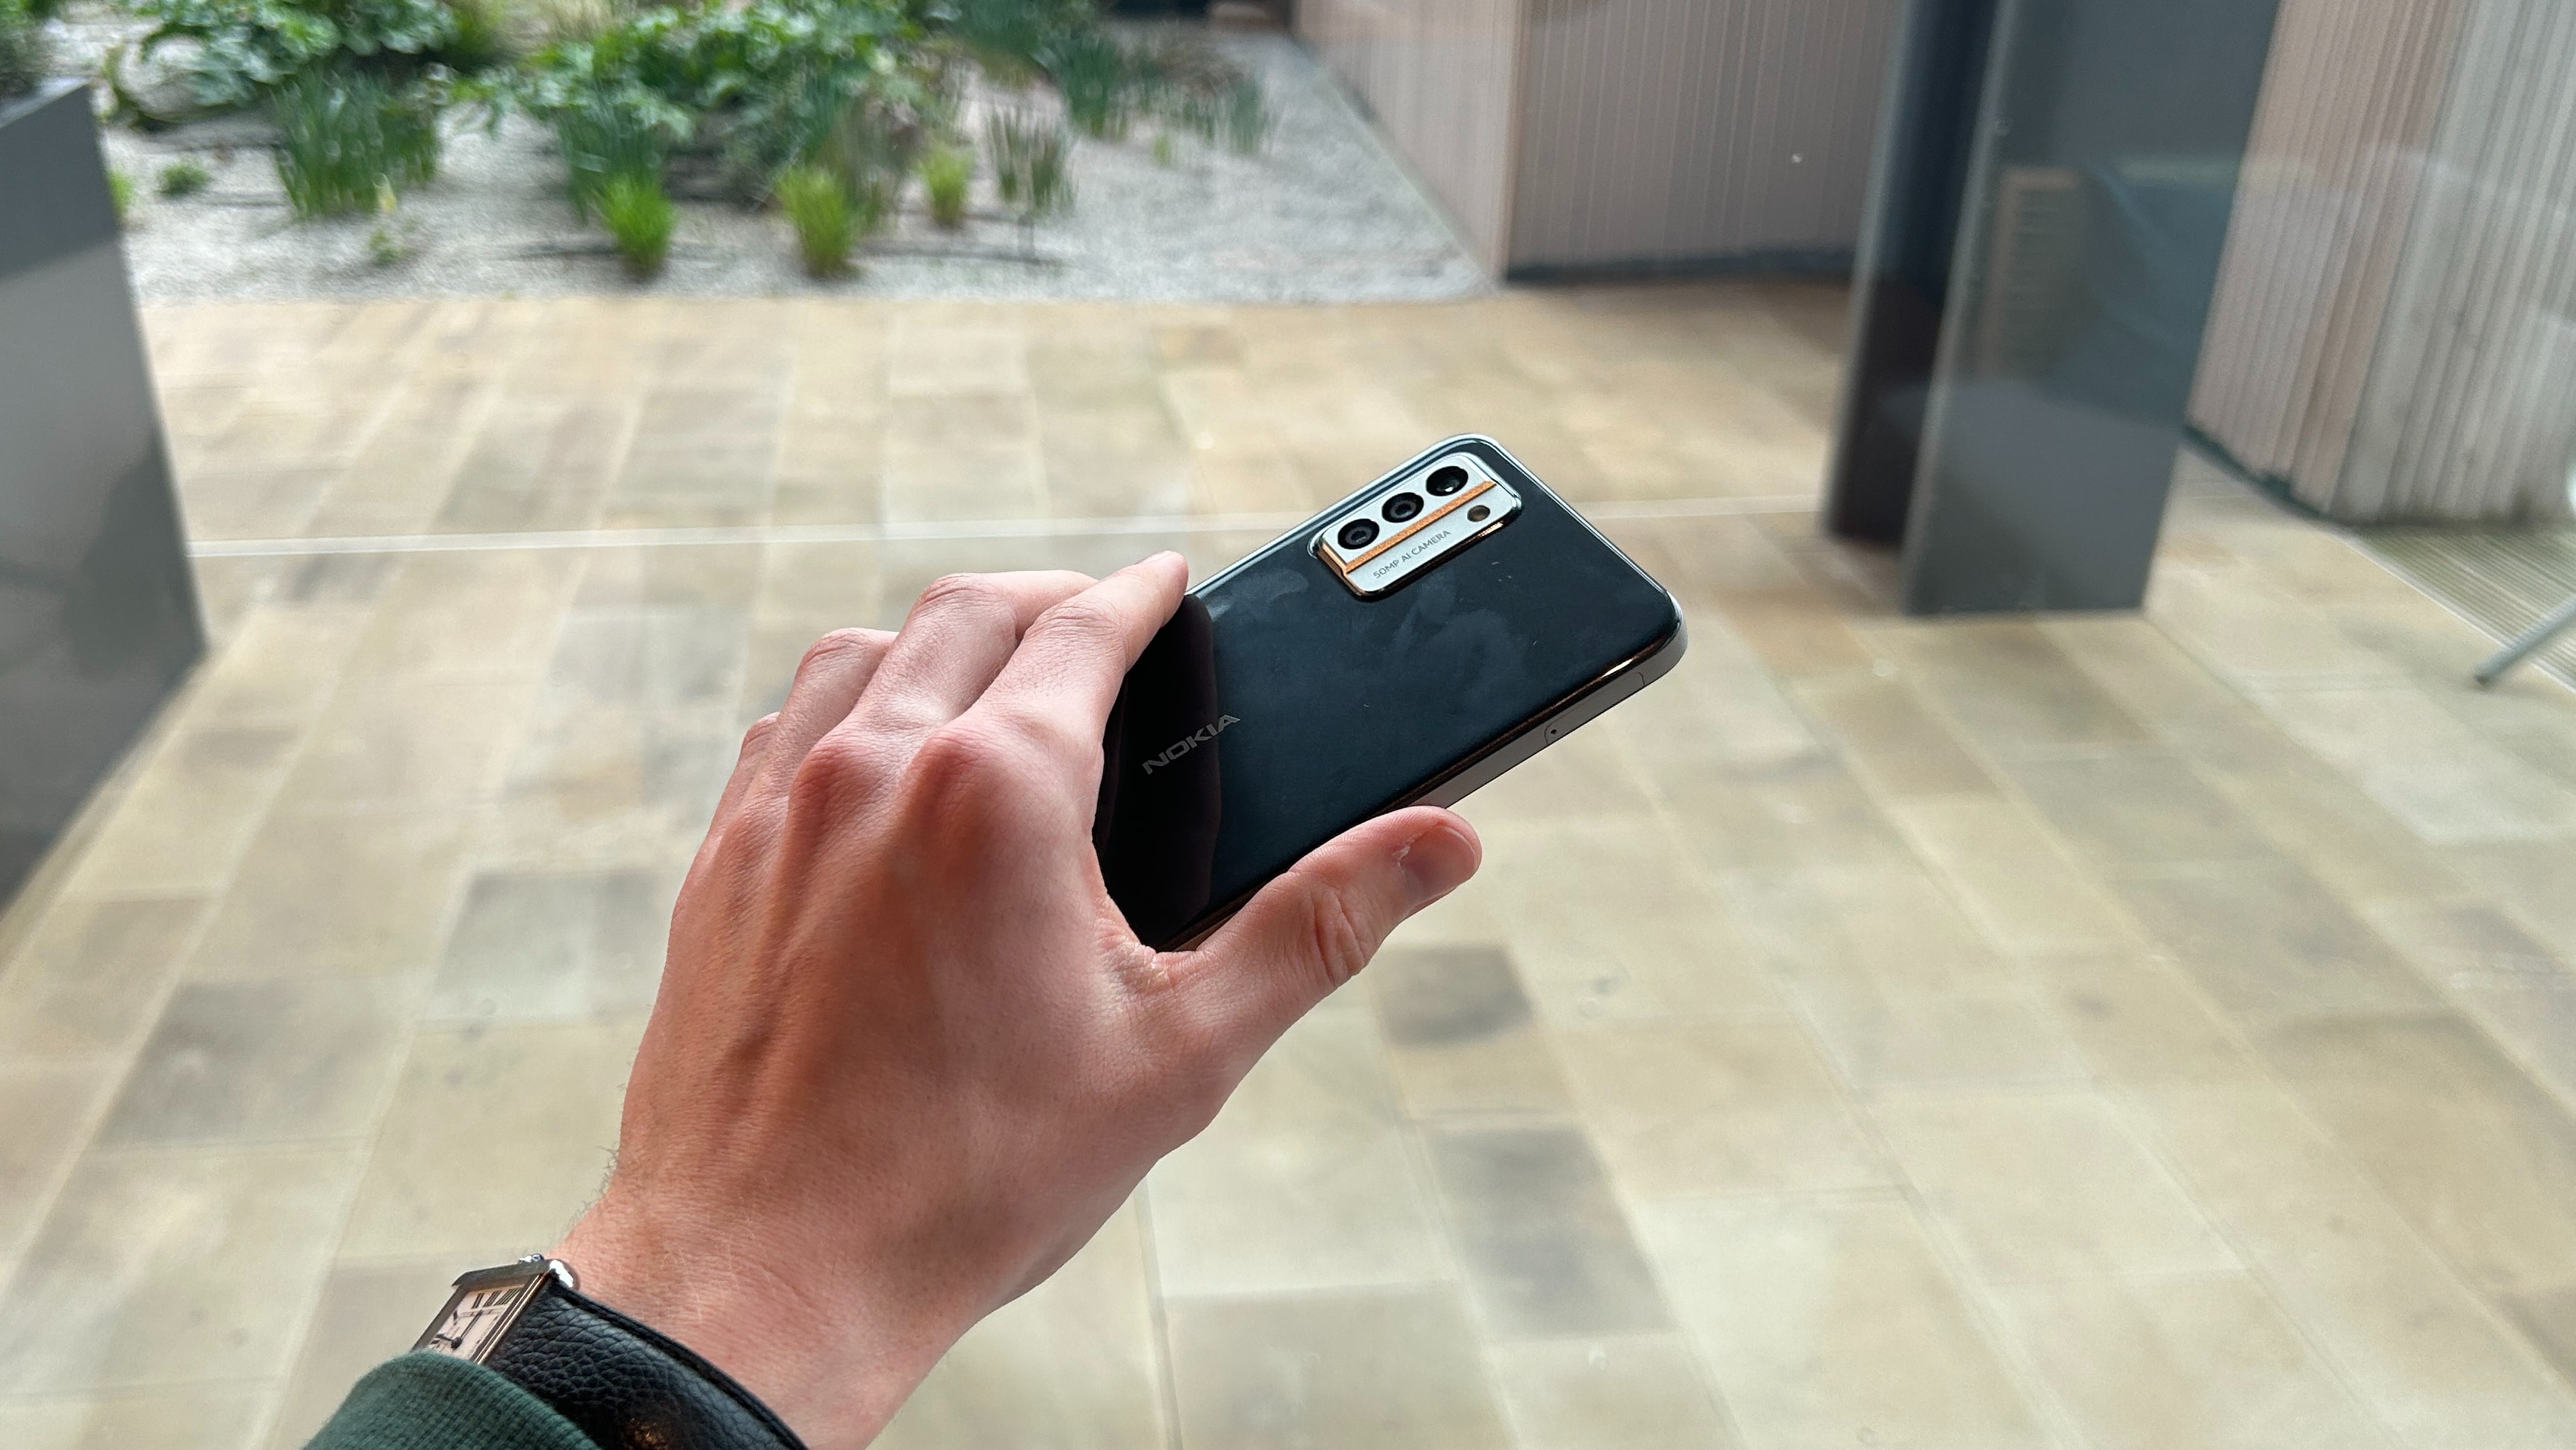 The Nokia G22 rear, as seen in hand